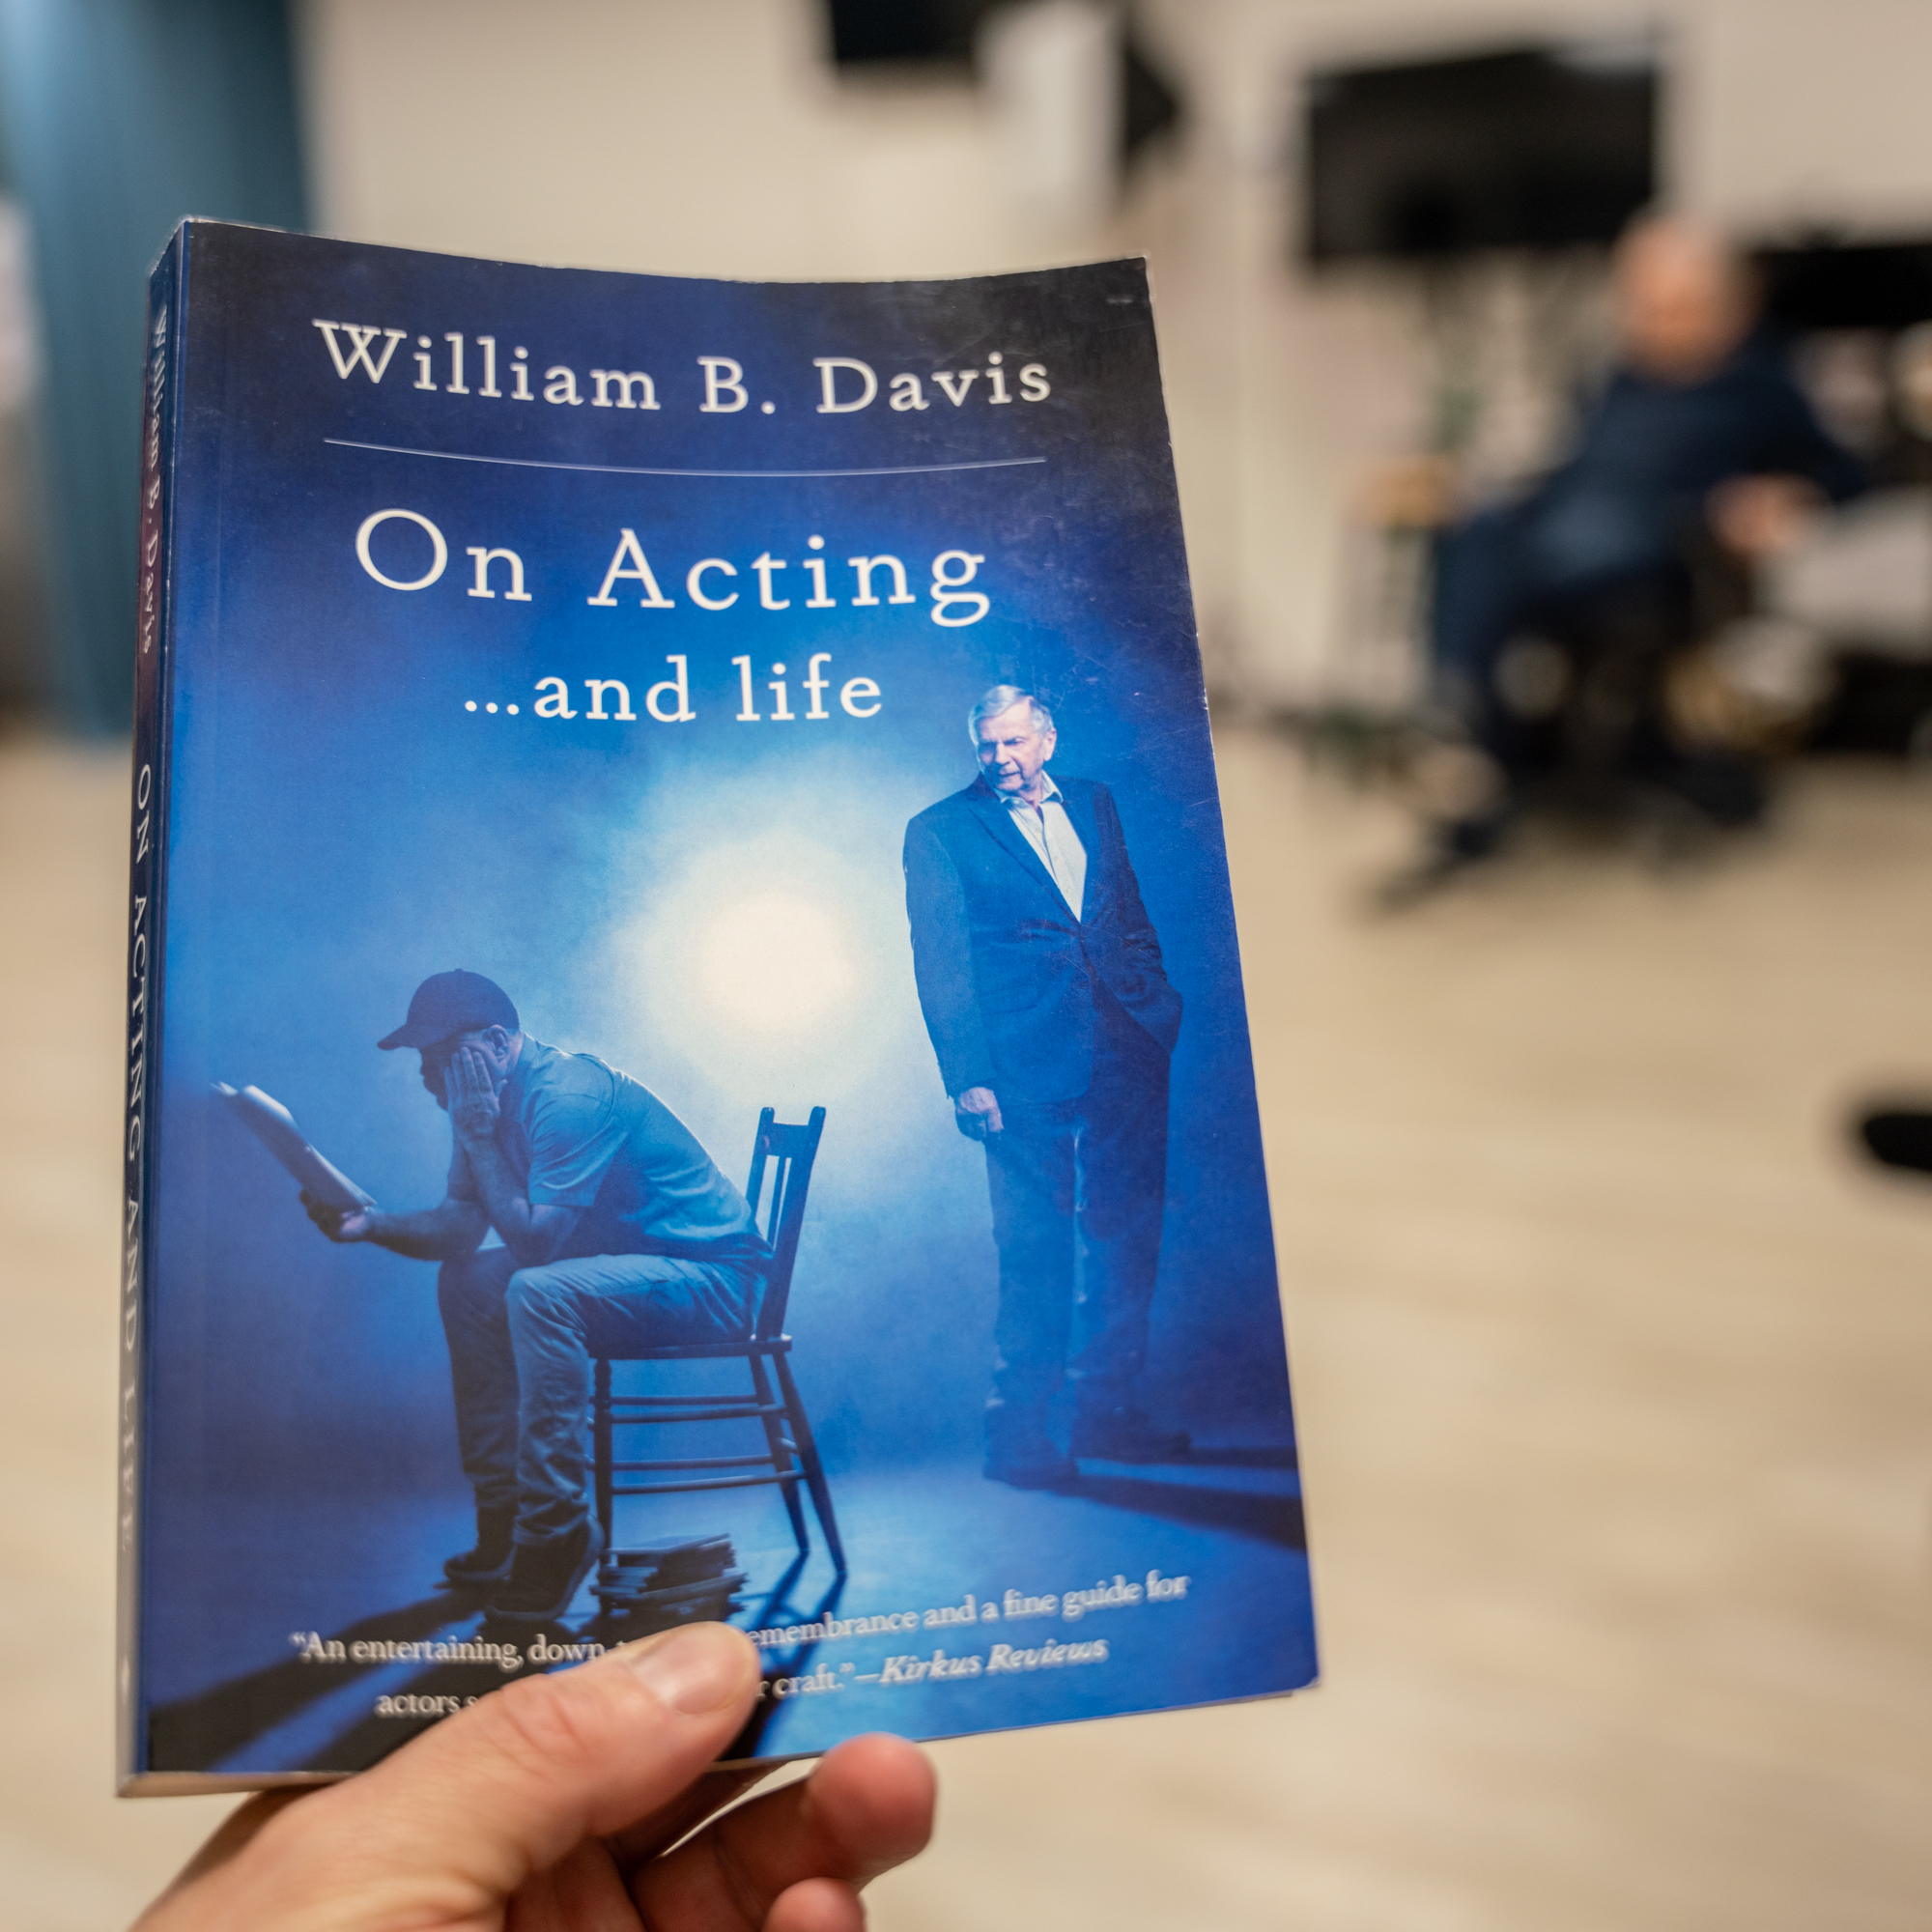 Photo of William B. Davis' book 'On Acting and Life'